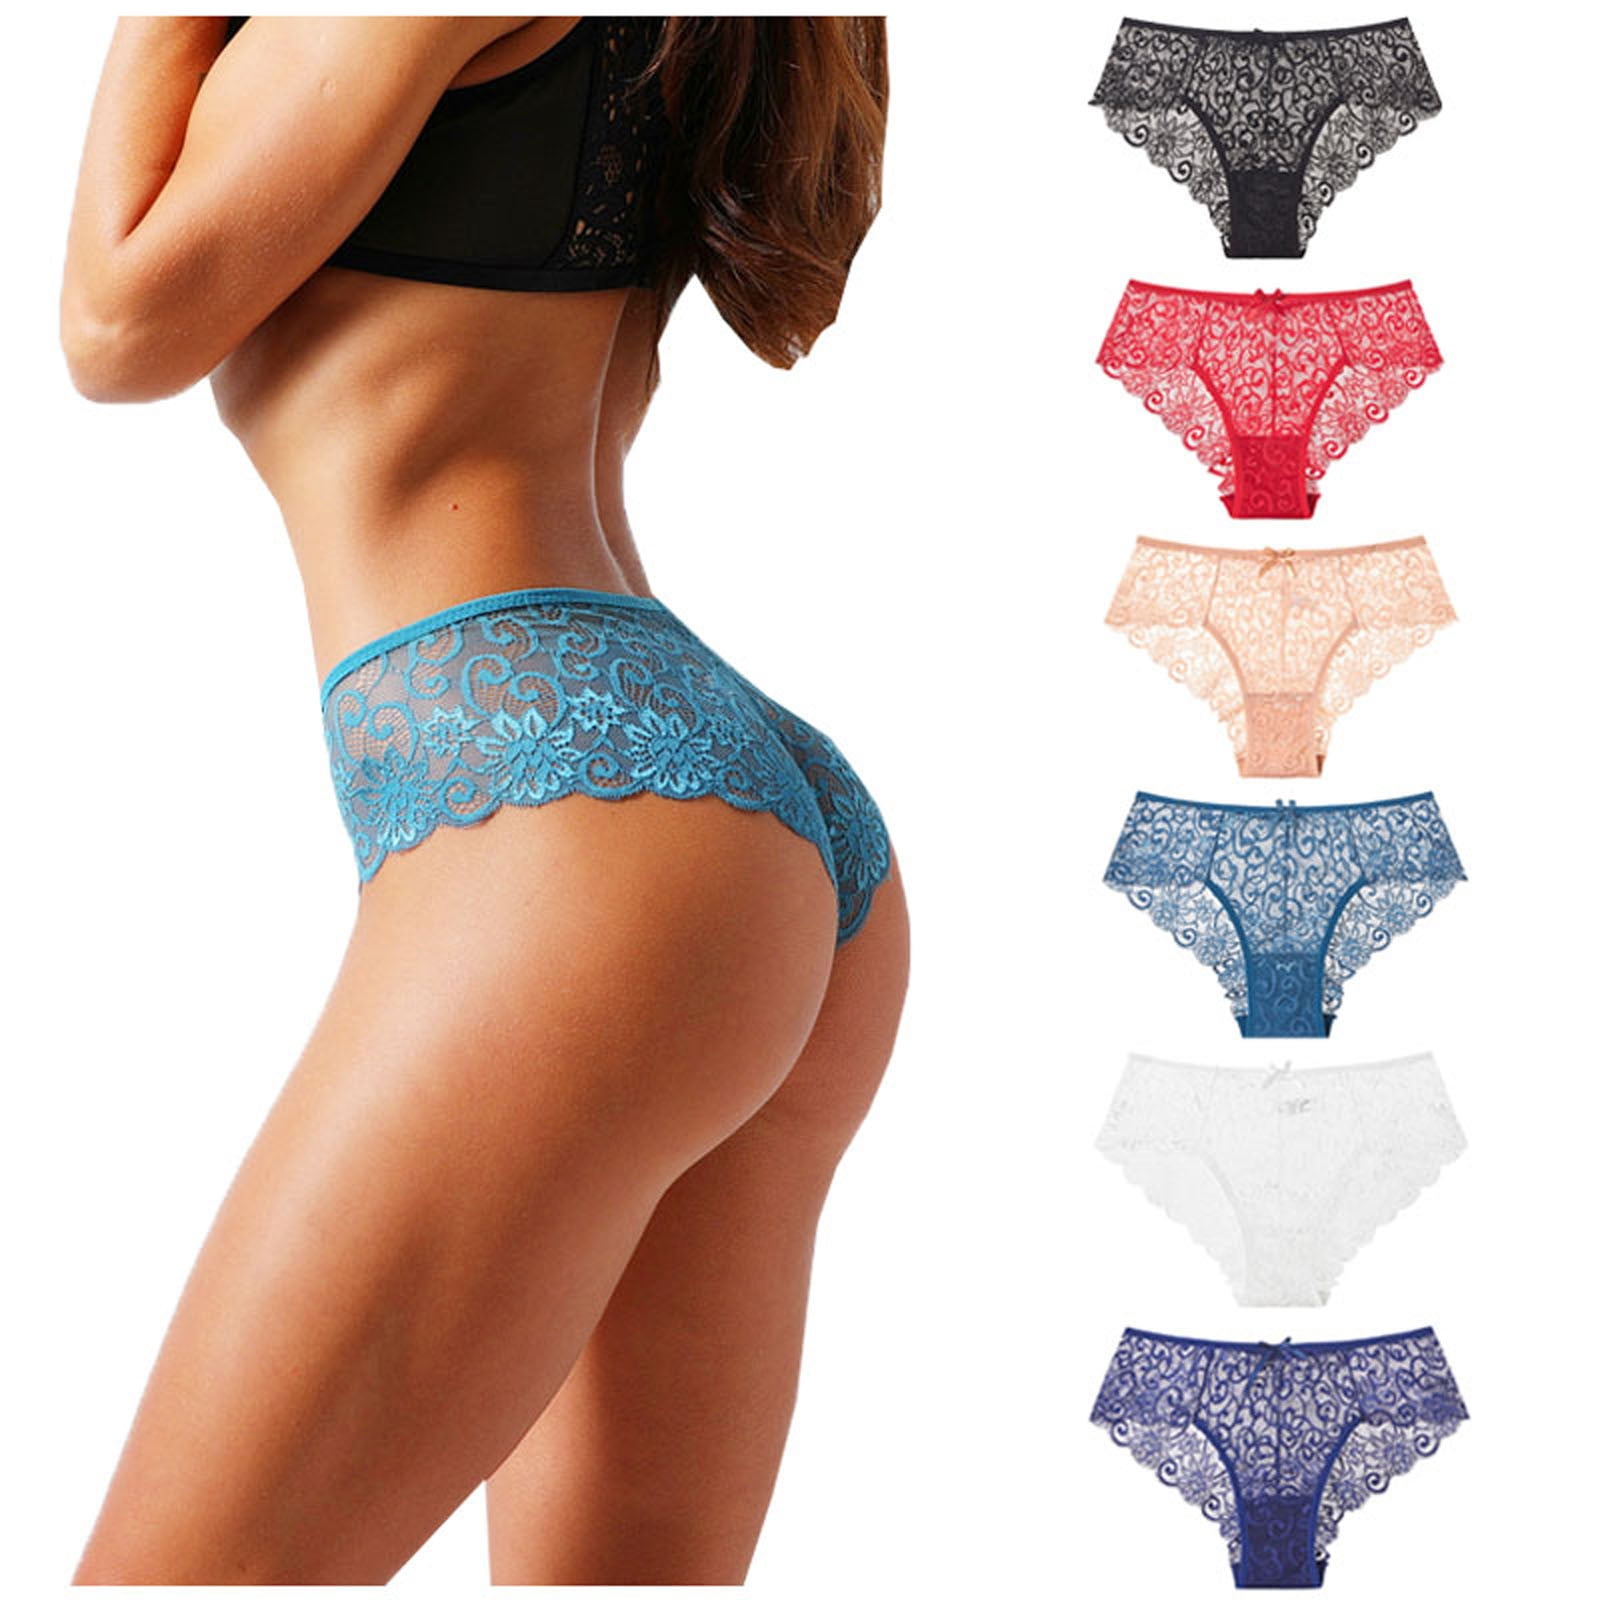 Super Soft Lace Cheeky Panty - Seamless Underwear for Women